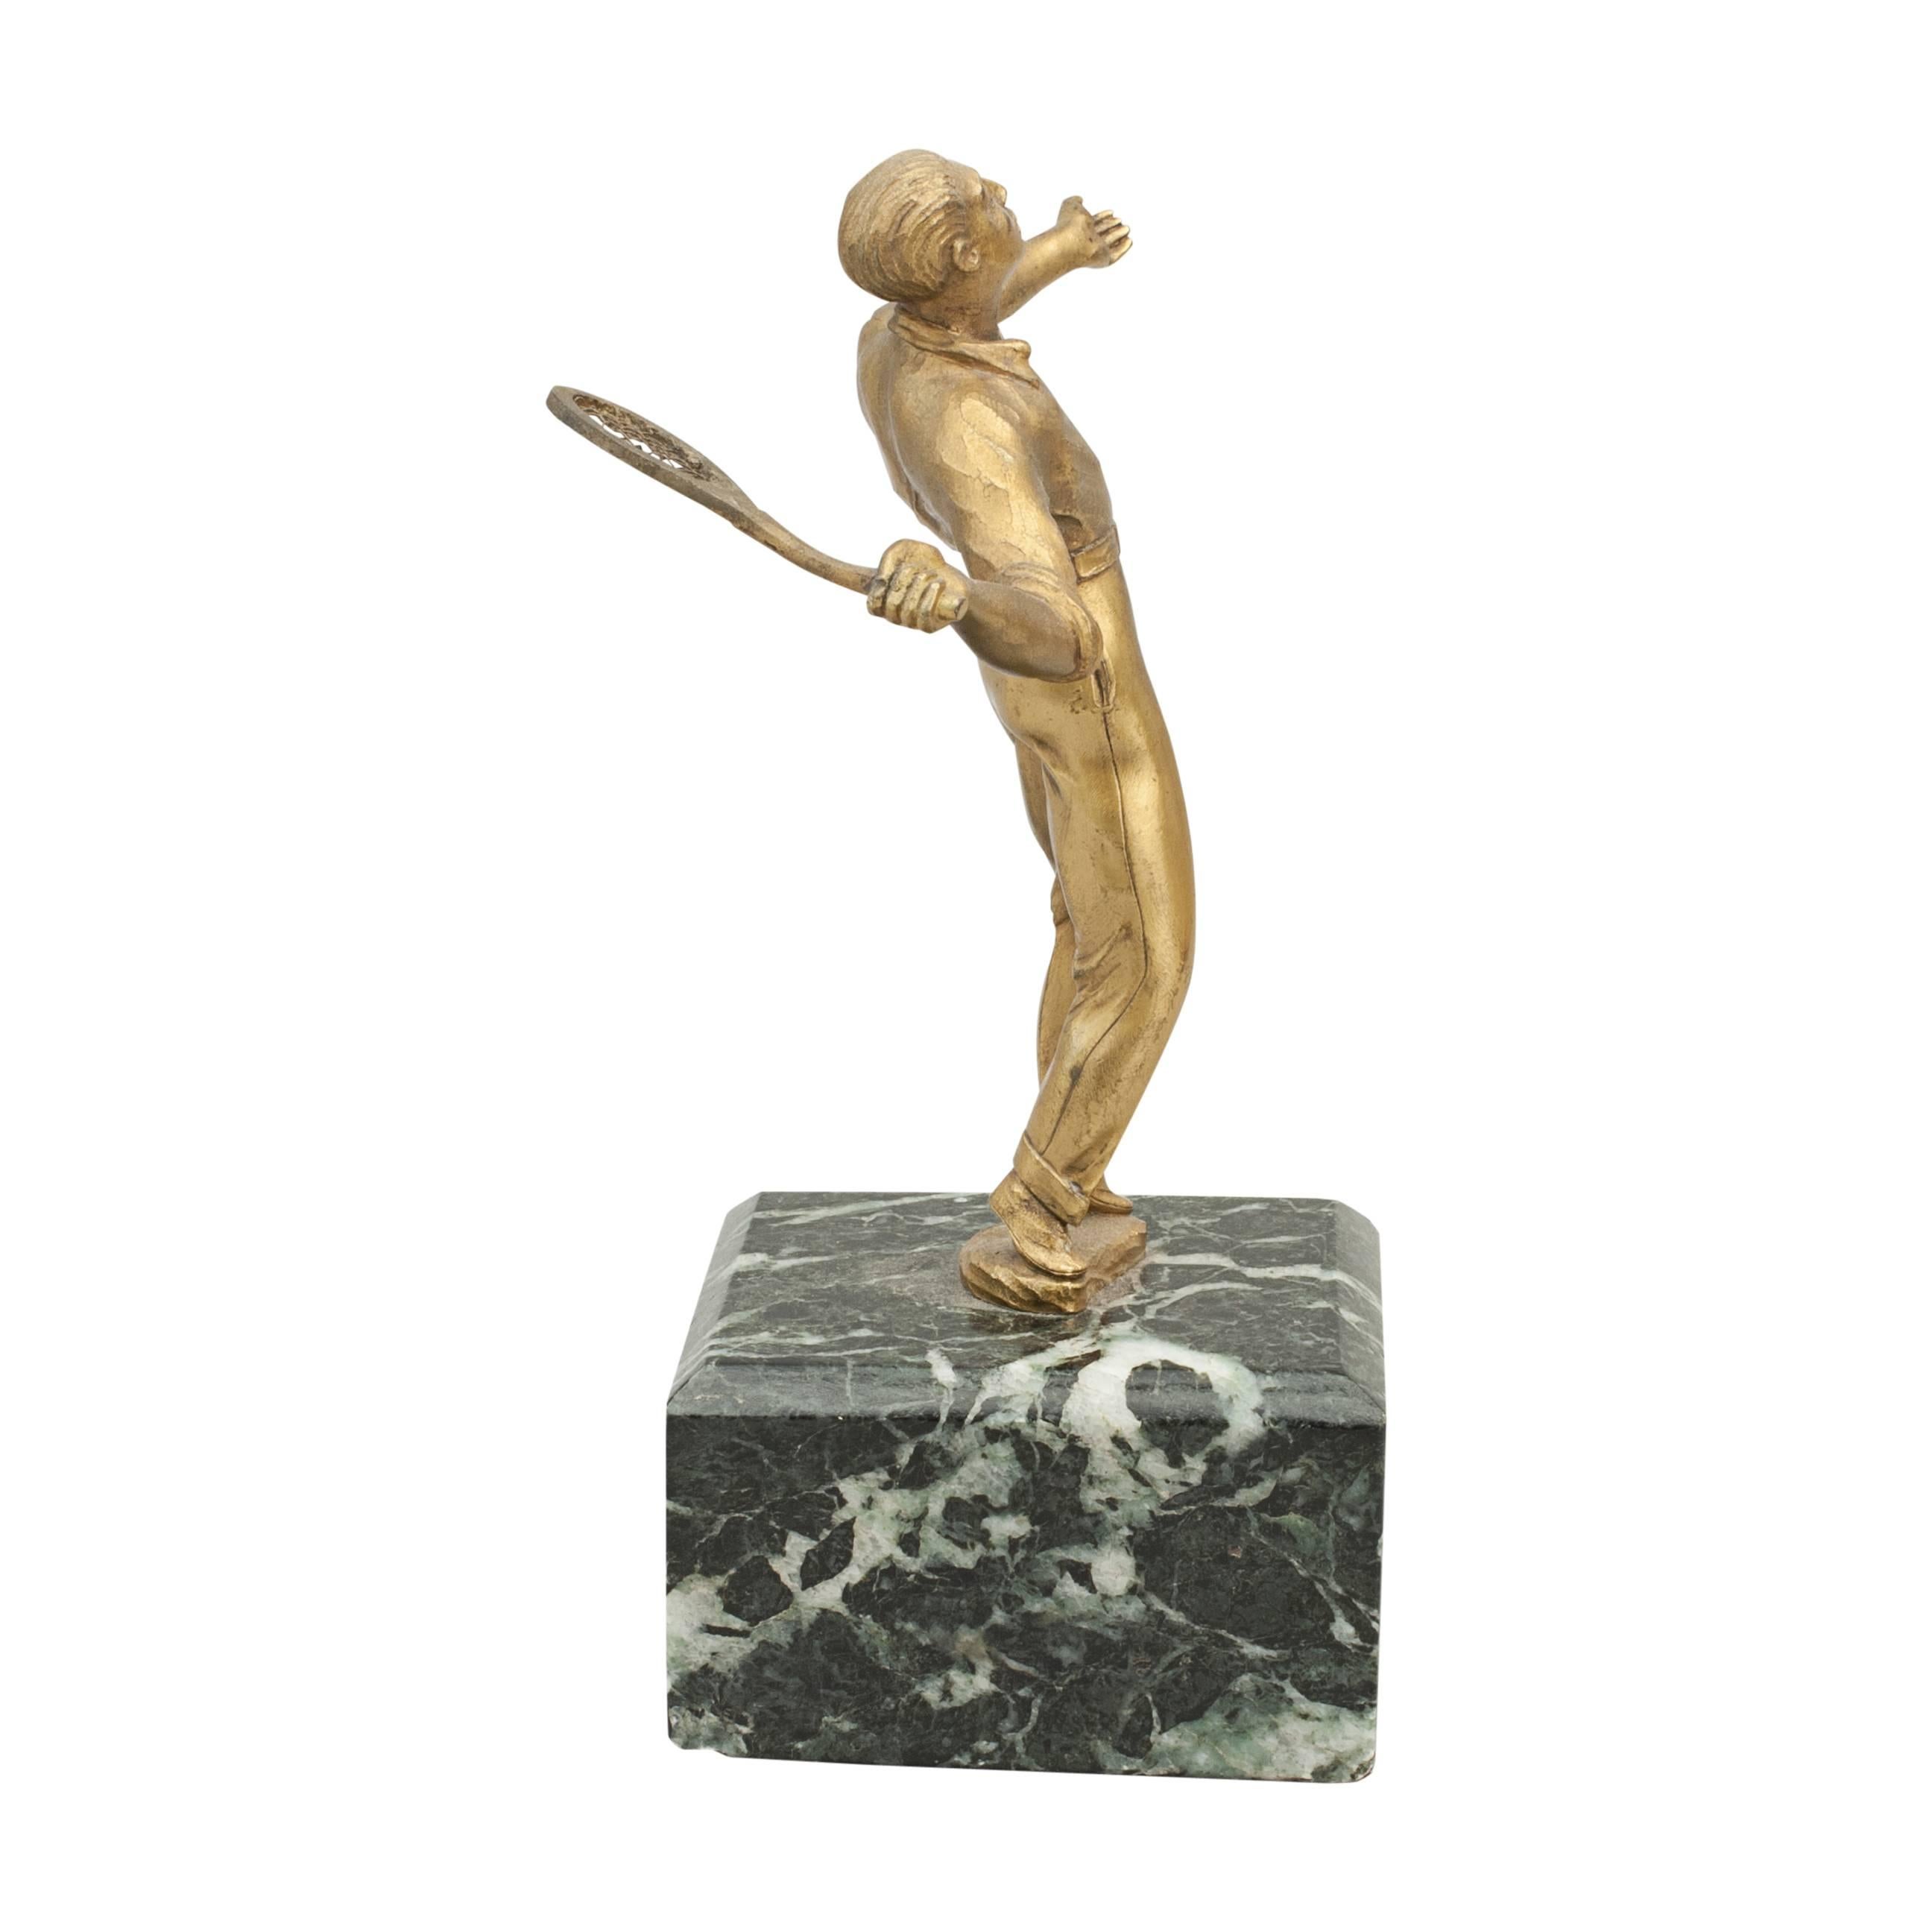 Antique tennis figure.
A fine figure of a male tennis player in serving position, dressed in long trousers and short sleeved shirt. The figure is made in brass, finished in gold color and stands on a marble base 2' tall.